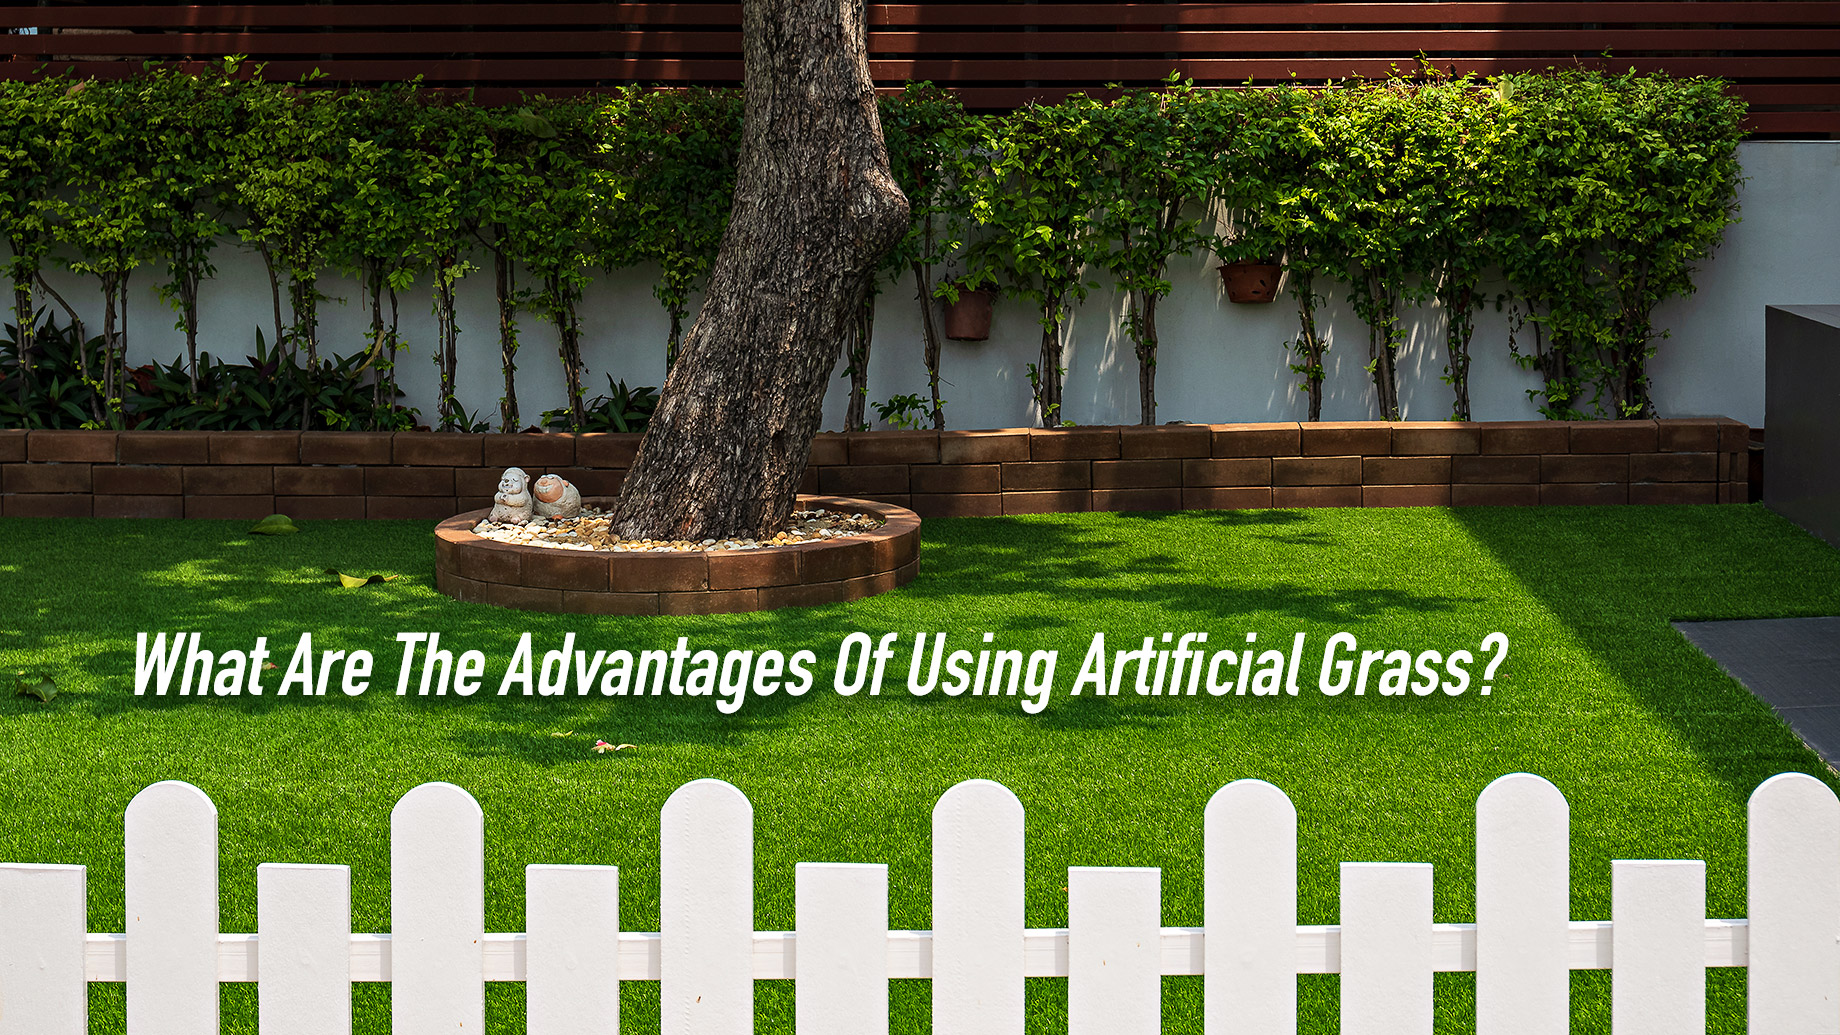 What Are The Advantages Of Using Artificial Grass?